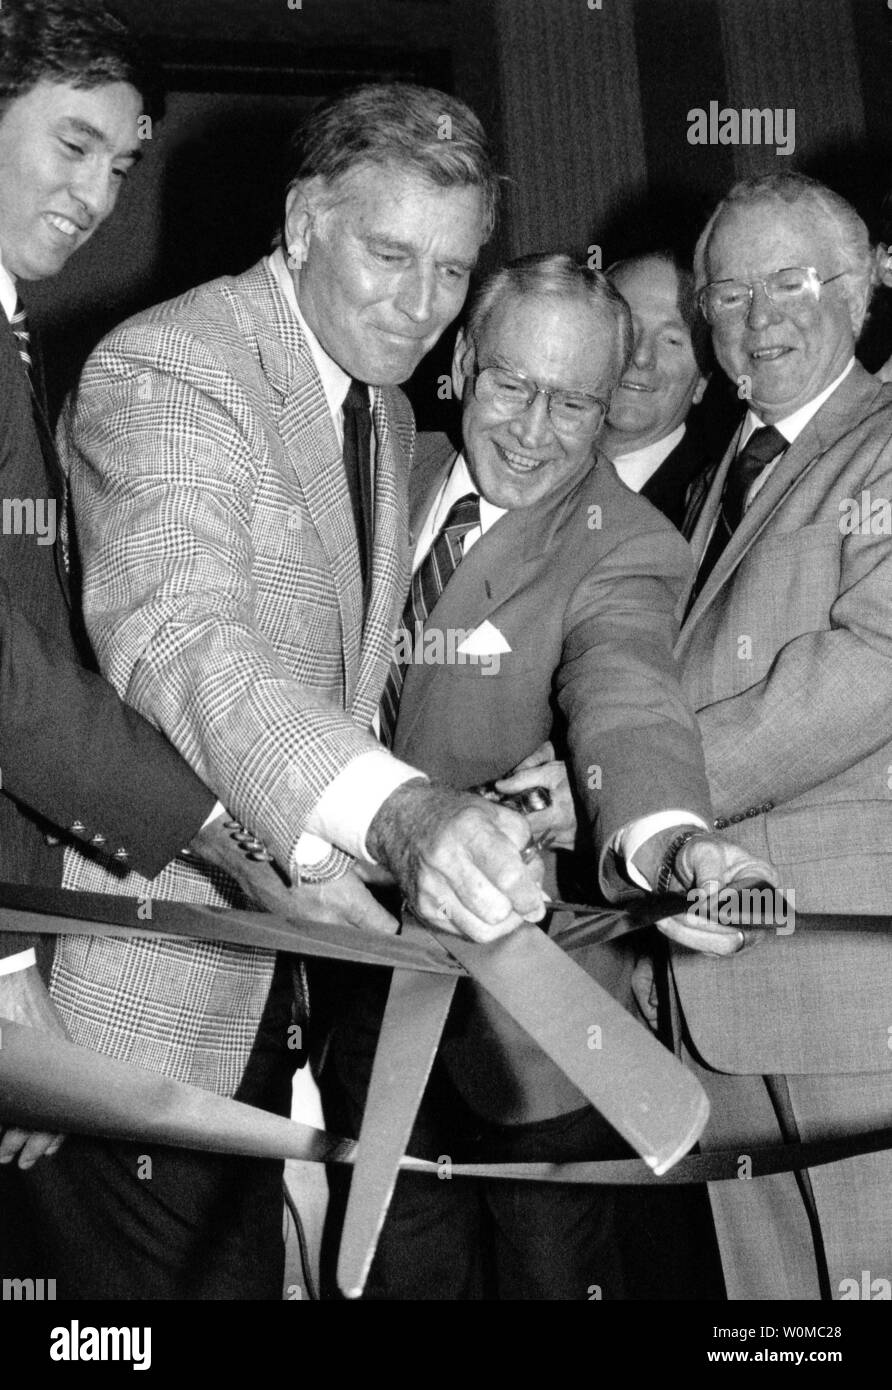 Charlton Heston died at the age of 84 at his home in Beverly Hills on April 5, 2008. He is seen in this June 26, 1986 file photo cutting the ribbon to officially open the fifth U.S. Capitol exhibition of winning art from Congressional high school art competitions. Assisting Heston are from left: Representative Thomas Downey D-New York, Heston, House Majority Leader Jim Wright D-Texas and Roger B. Smith, Chairman of the Board of General Motors, the corporate sponsor of the opening festivities. (UPI Photo/Doug Mills/Files) Stock Photo